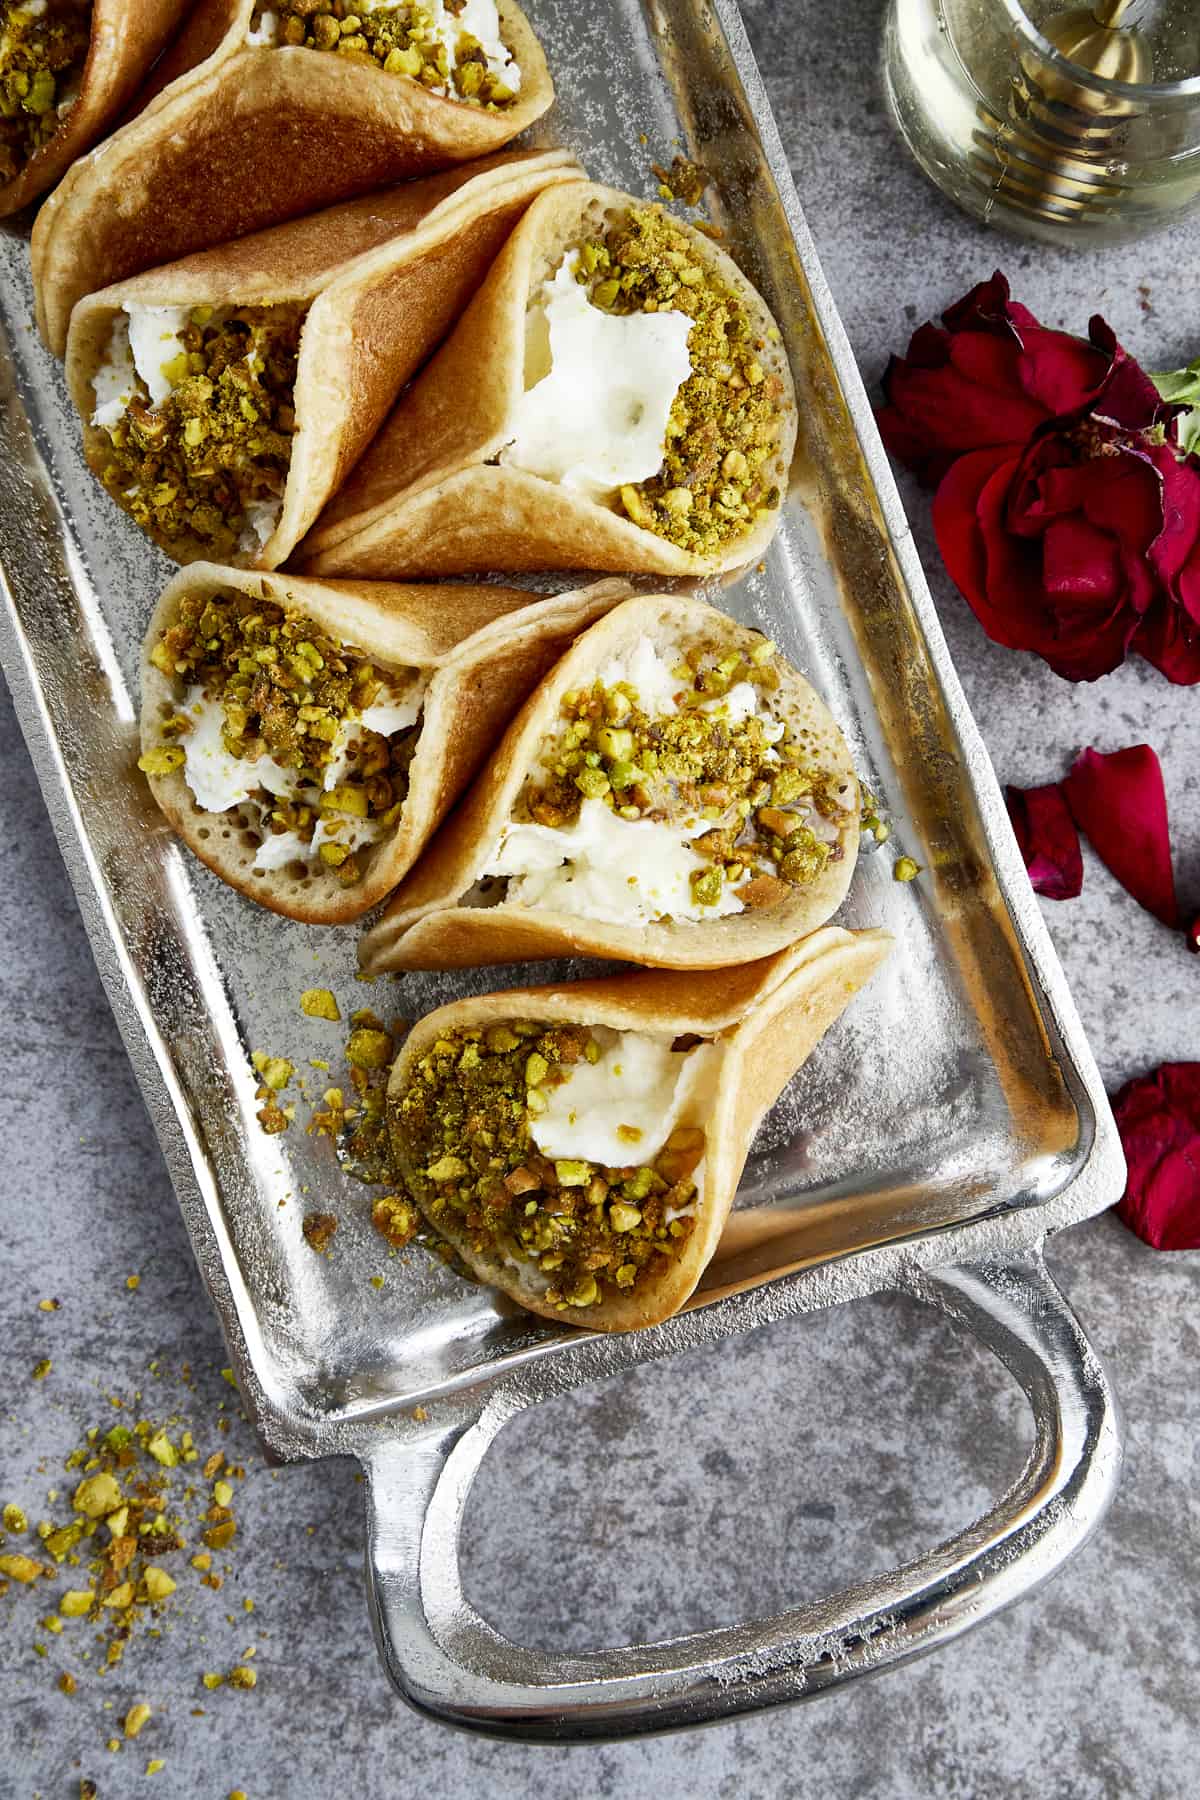 Atayef with Whipped Cream and Pistachios